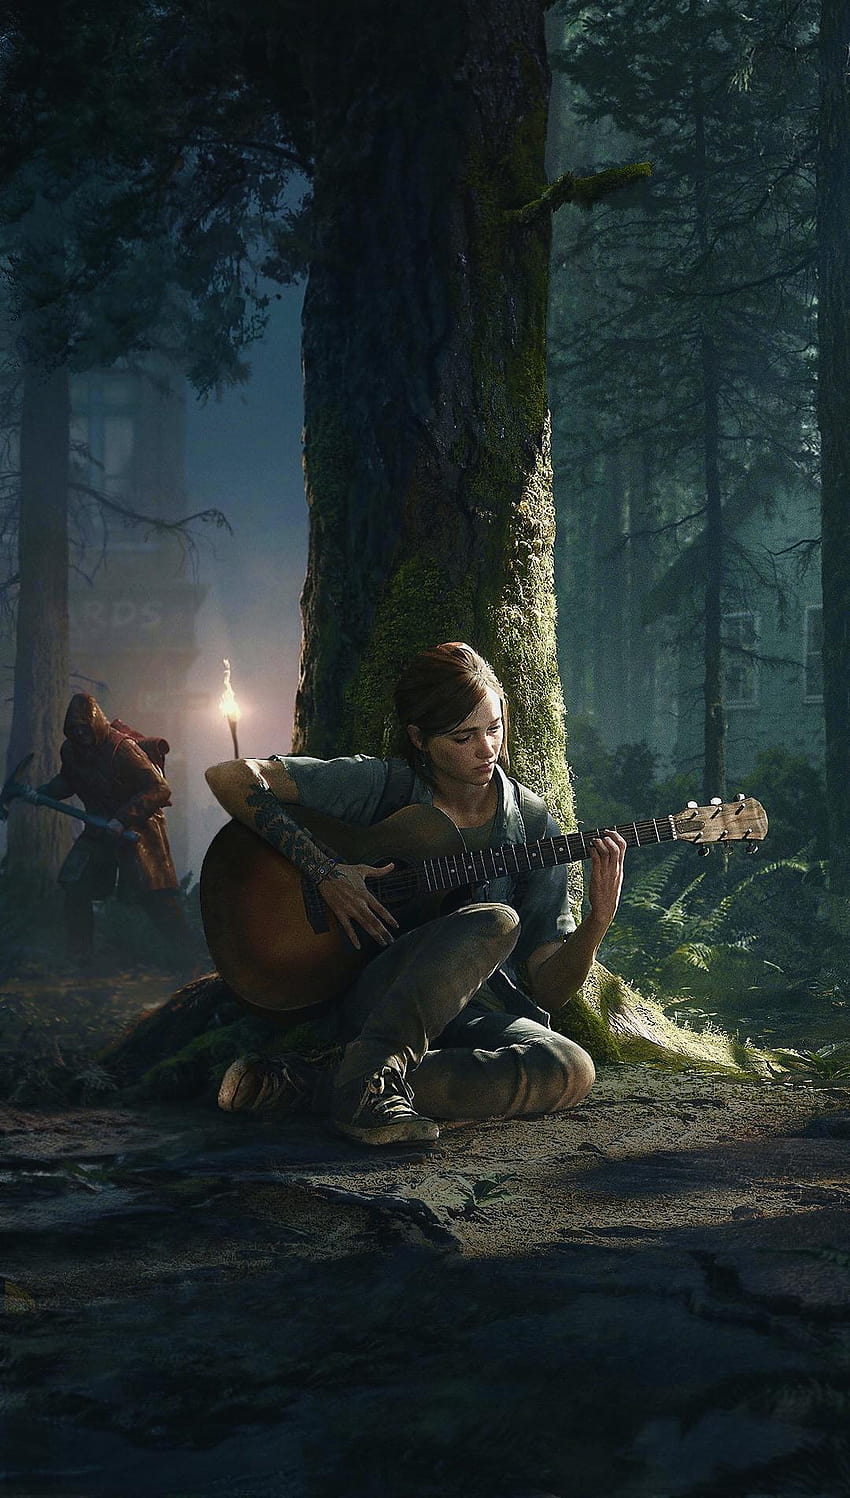 Download wallpaper Ellie, Ellie, ps4, some of us, the last of us part 2,  game art, section games in resolution 1366x768